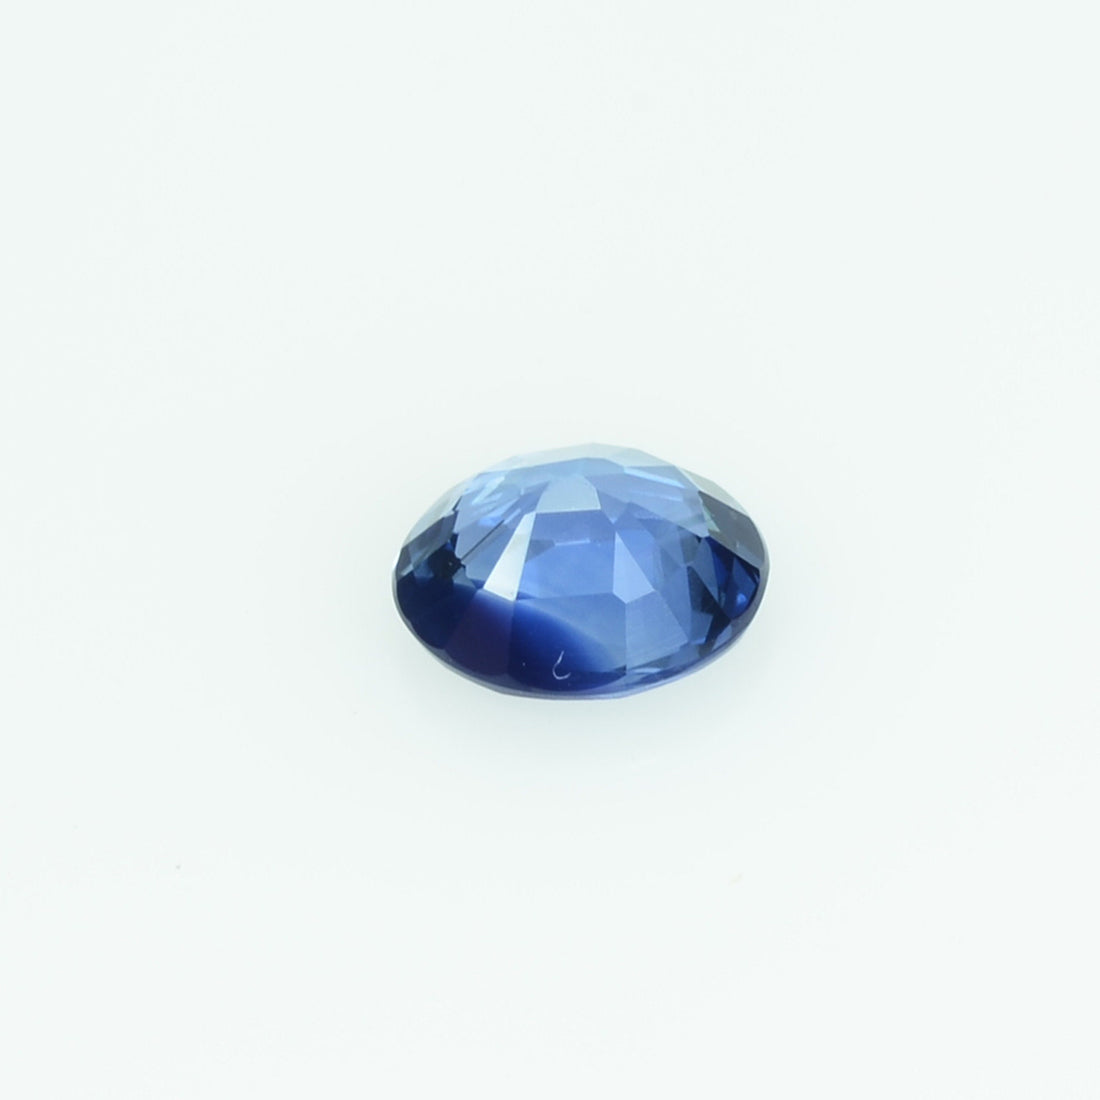 0.56 Cts Natural Blue Sapphire Loose Gemstone Oval Cut